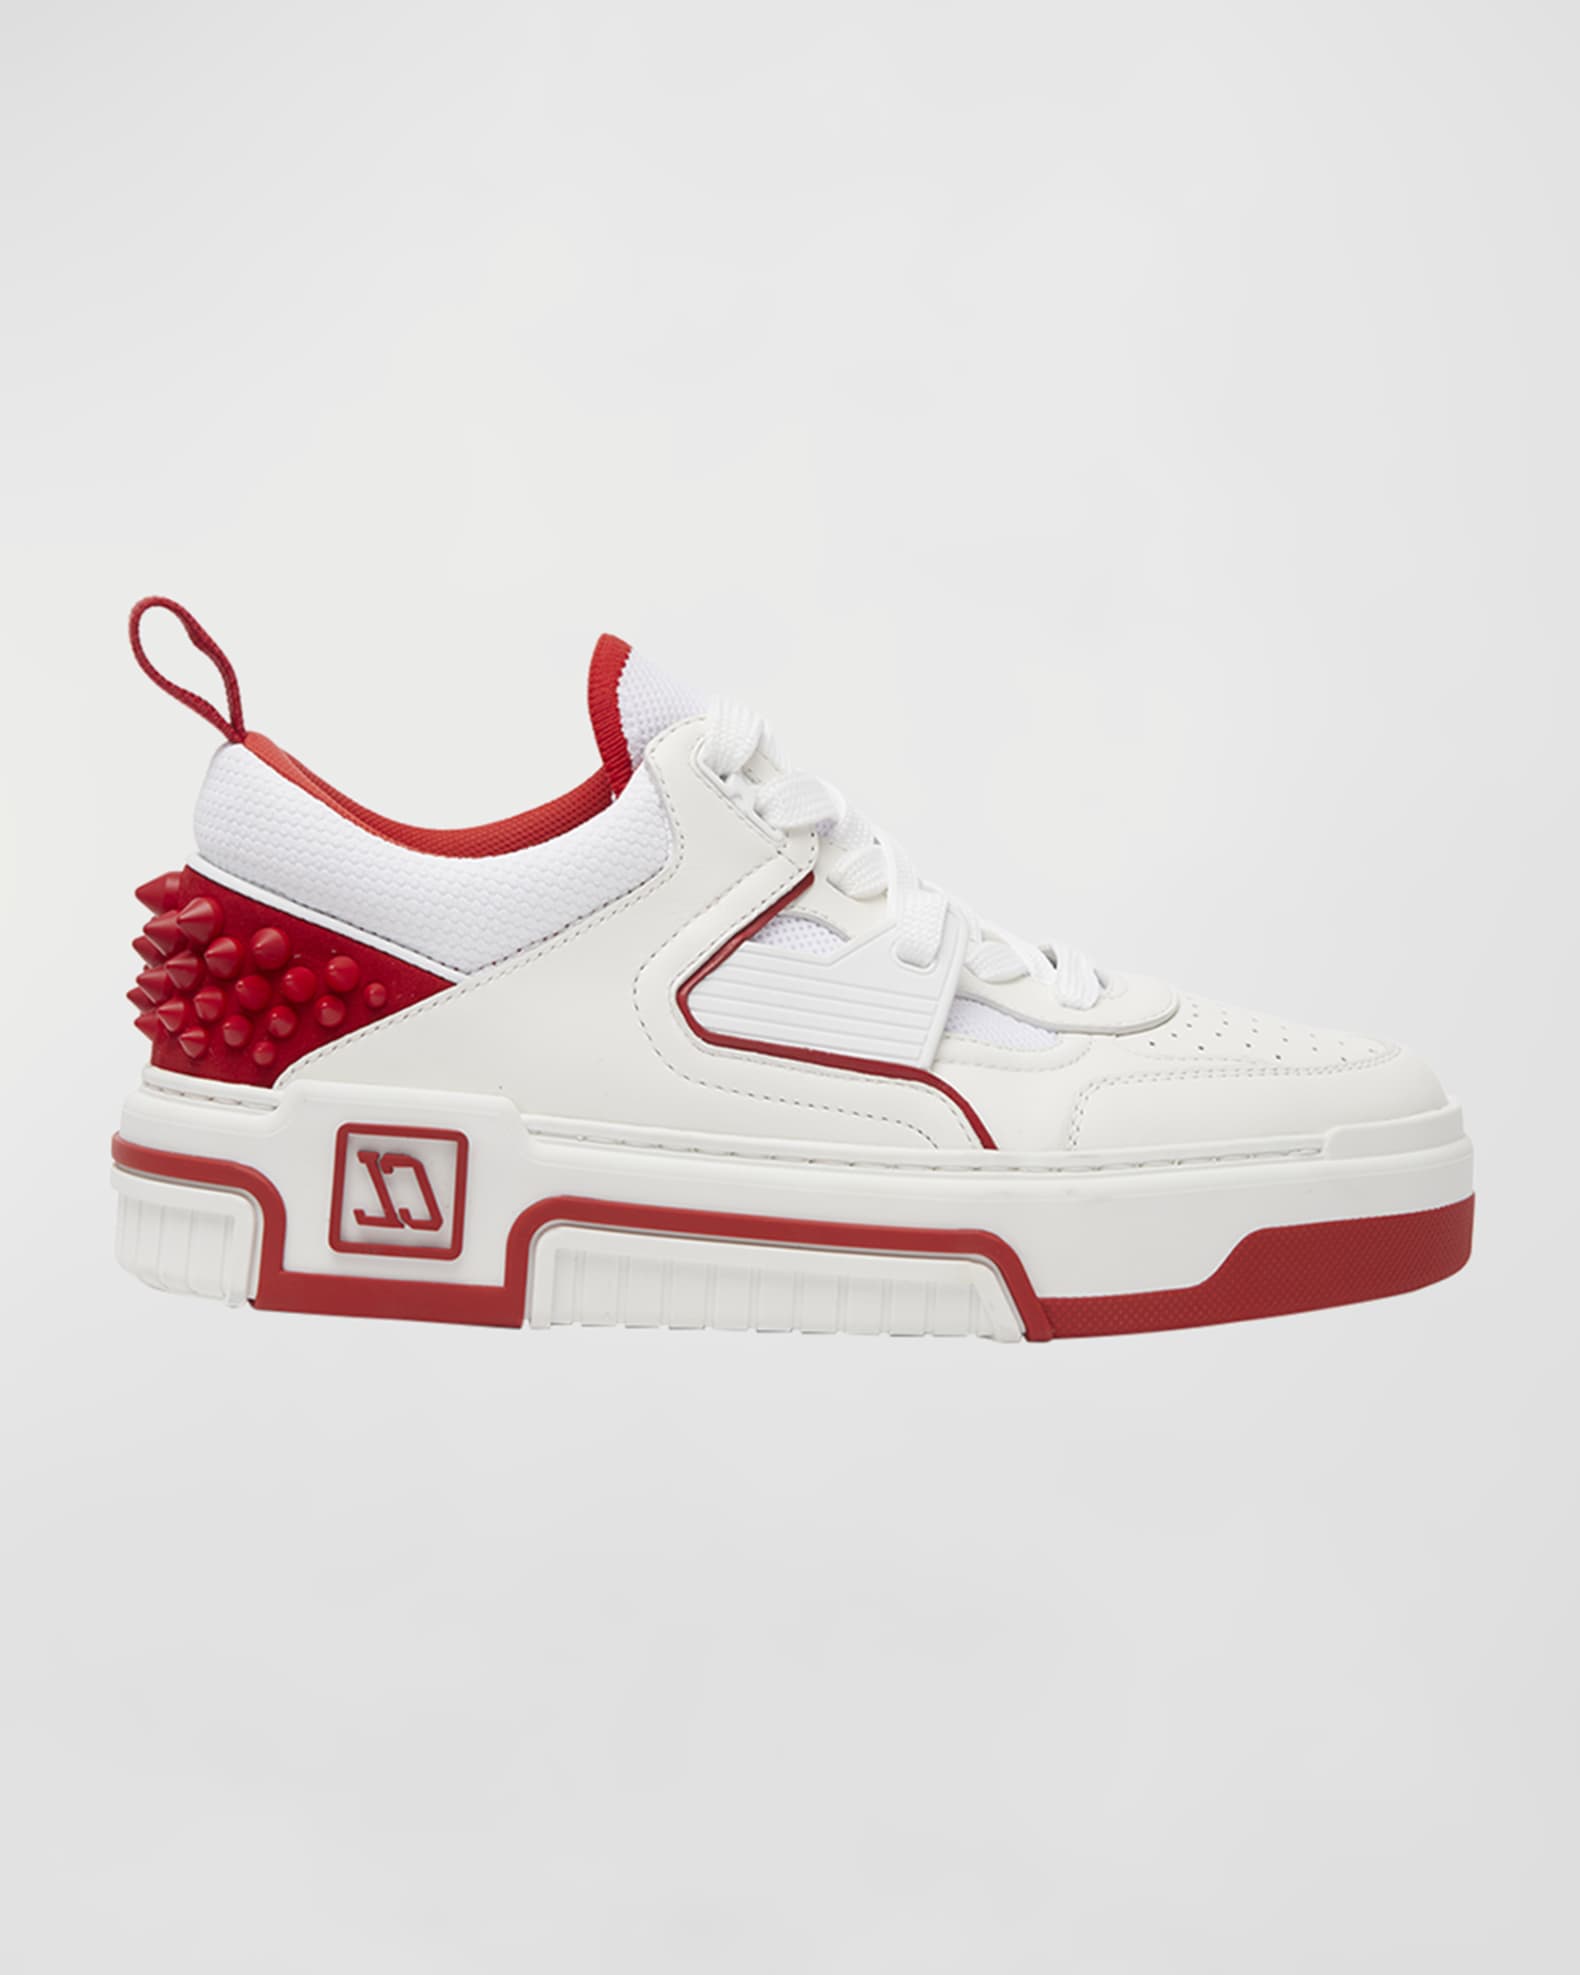 LOUIS VUITTON Monogram leather low-cut sneakers/ shoes 7 Red/Silver/White